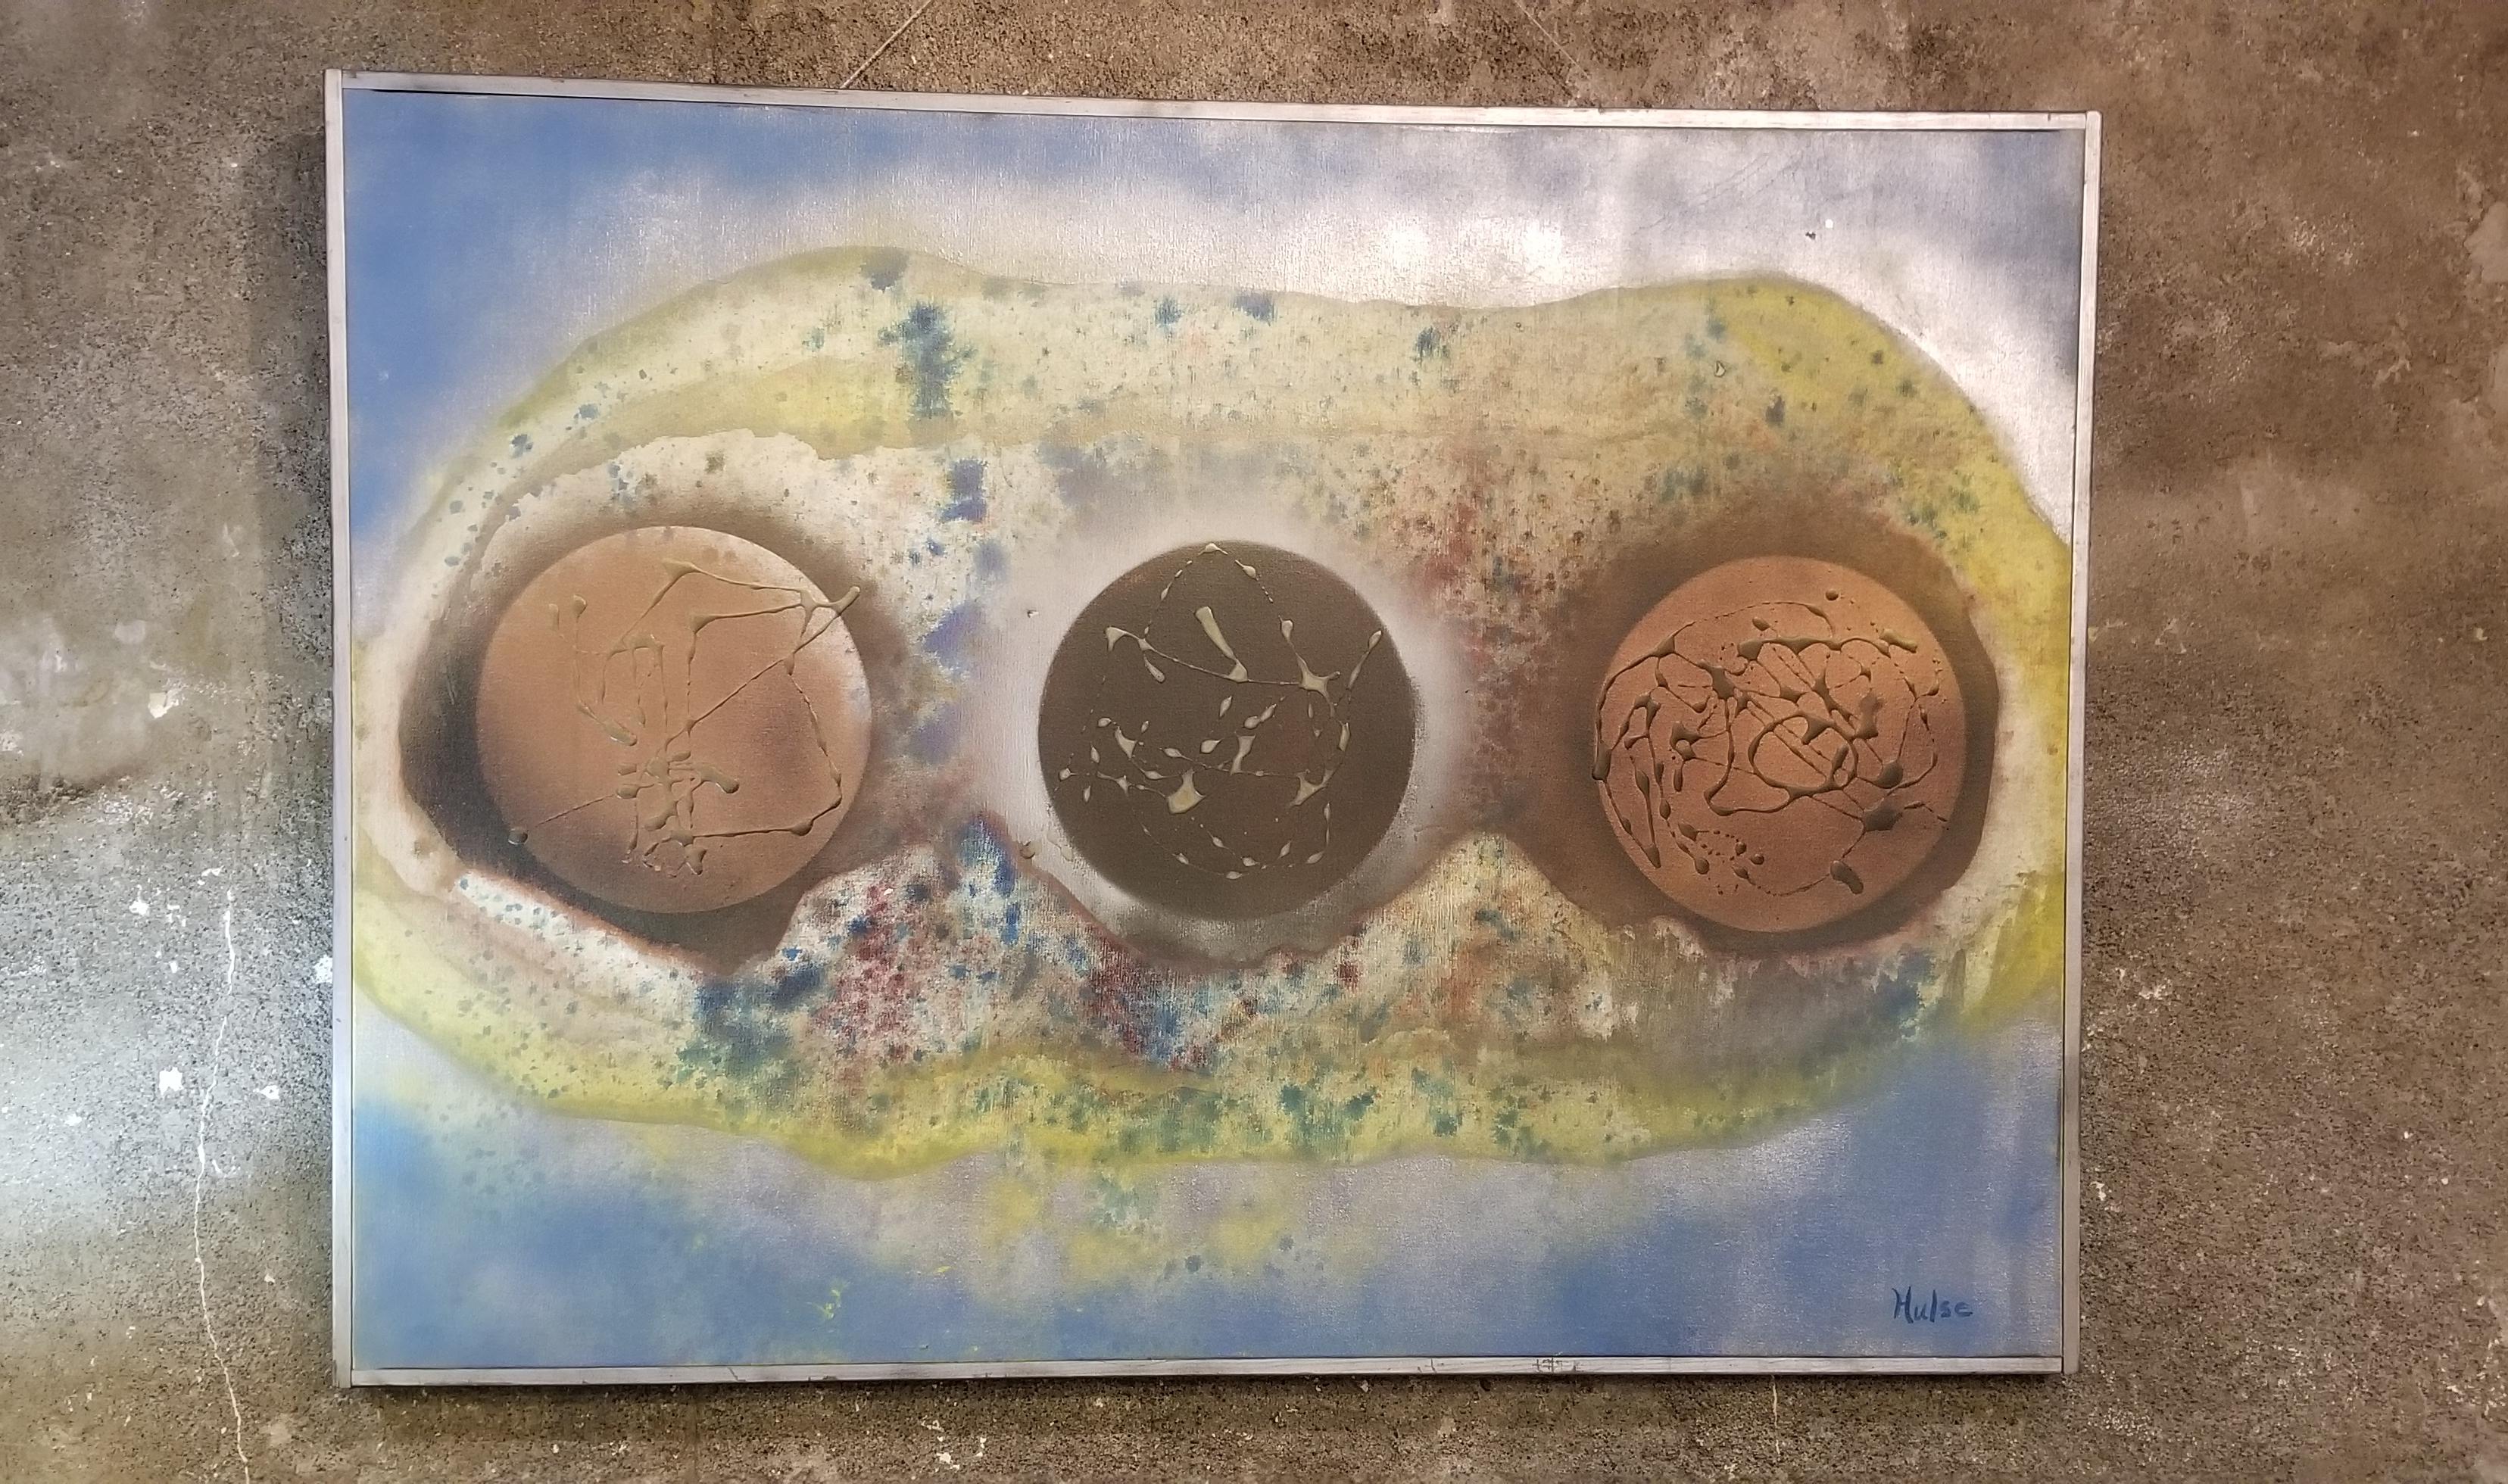 Mid-Century Modern acrylic on canvas abstract painting. Three textured spheres with outer space, planet like appearance. Retains original silver painted wood frame, signed lower right 